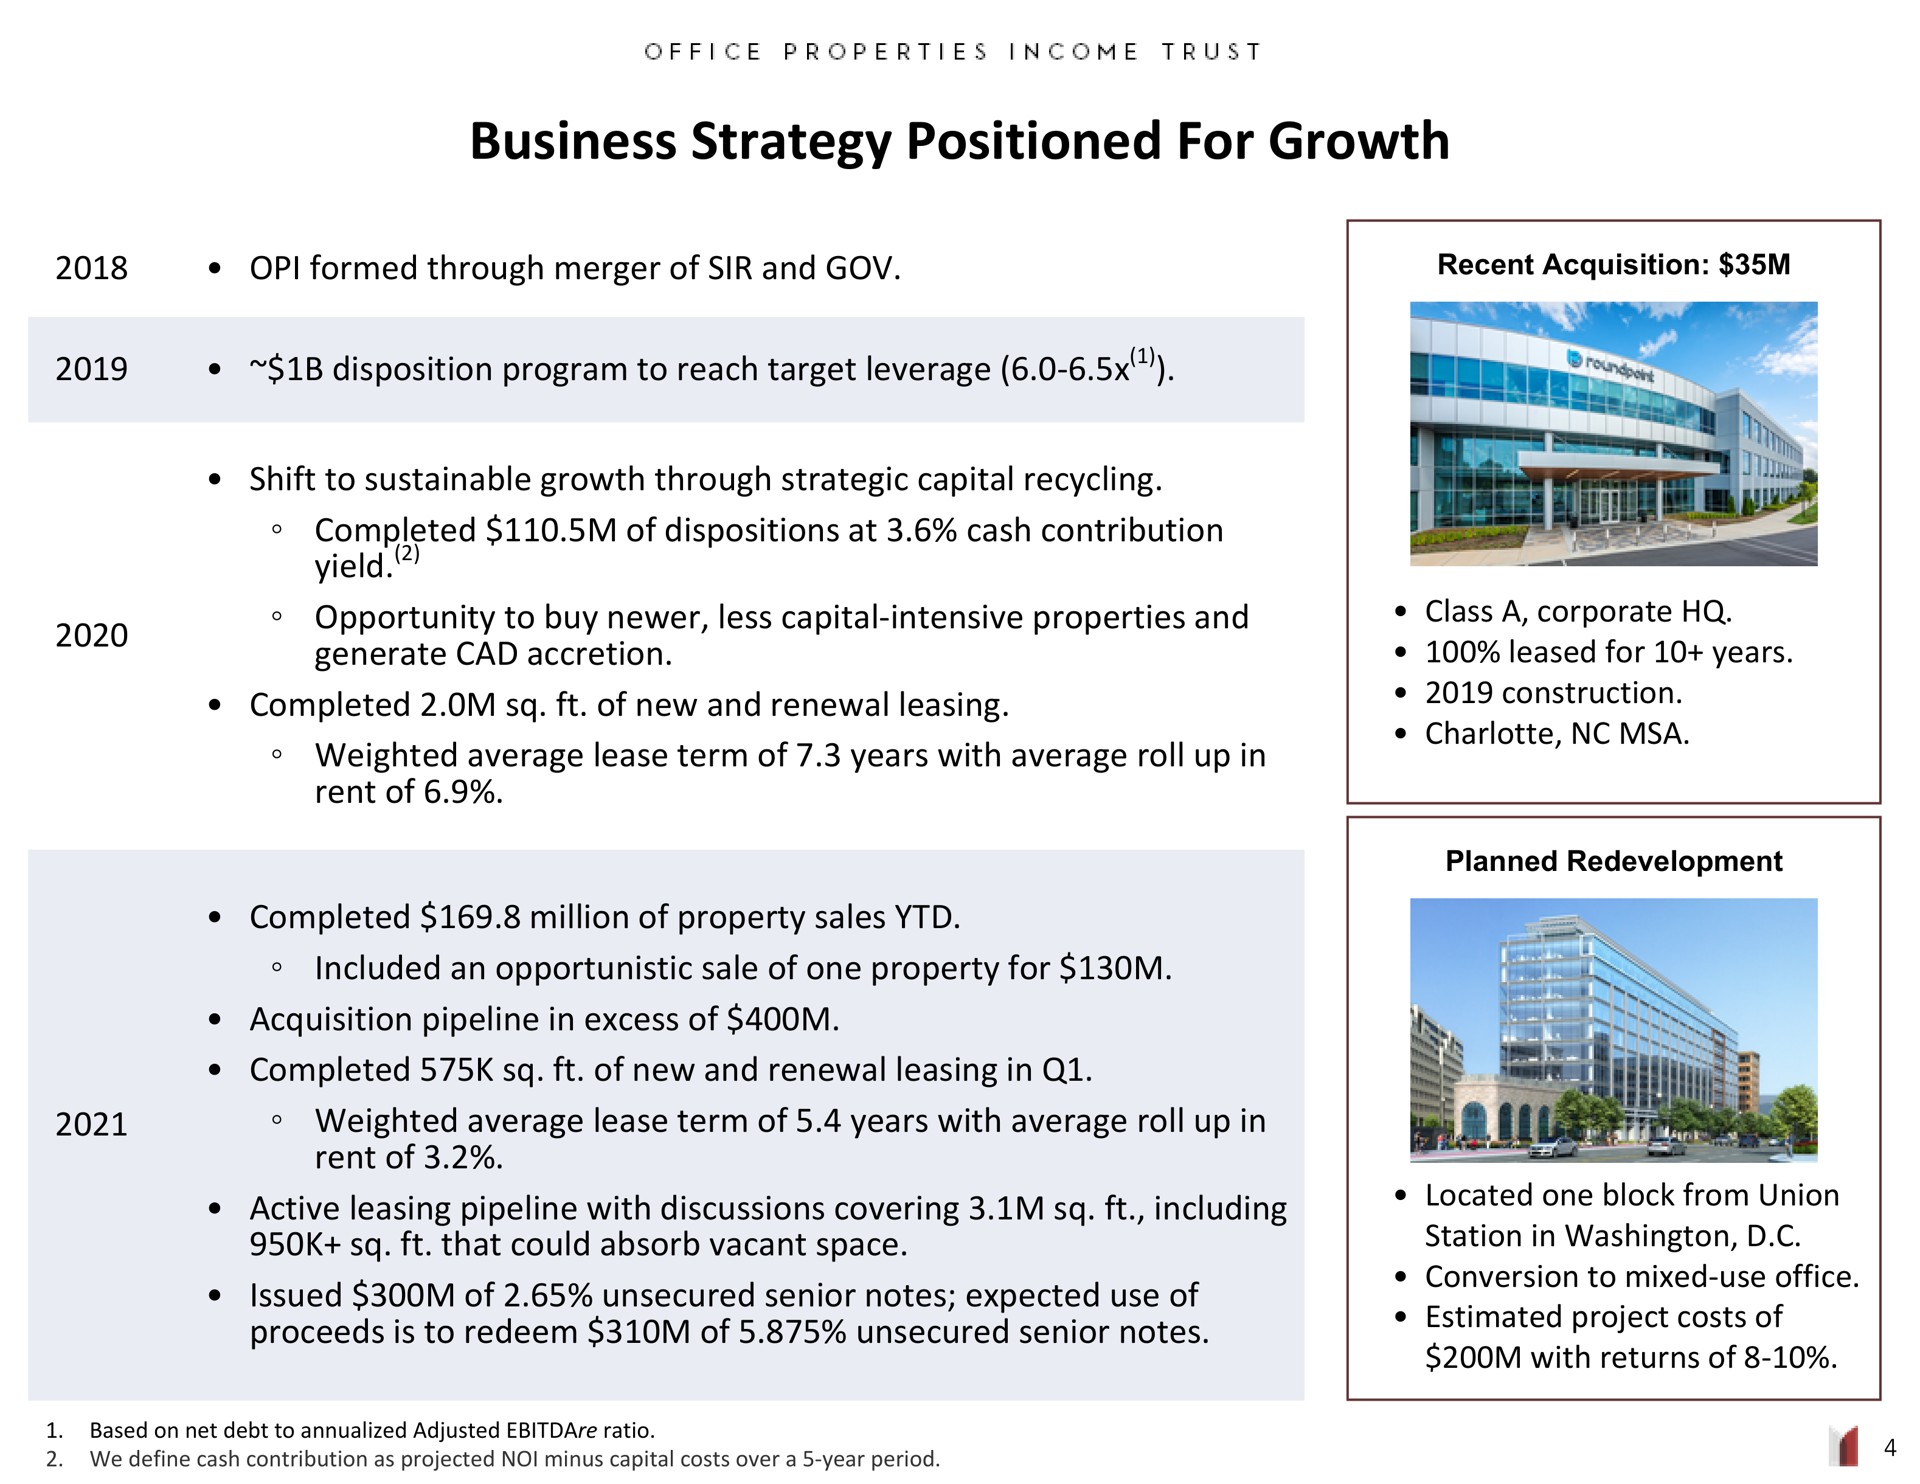 business strategy positioned for growth formed through merger of sir and disposition program to reach target leverage shift to sustainable growth through strategic capital recycling completed of dispositions at cash contribution yield opportunity to buy less capital intensive properties and generate cad accretion completed of new and renewal leasing weighted average lease term of years with average roll up in rent of completed million of property sales included an opportunistic sale of one property for acquisition pipeline in excess of completed of new and renewal leasing in weighted average lease term of years with average roll up in rent of active leasing pipeline with discussions covering including that could absorb vacant space issued of unsecured senior notes expected use of proceeds is to redeem of unsecured senior notes recent class a corporate leased construction station estimated project costs | Office Properties Income Trust